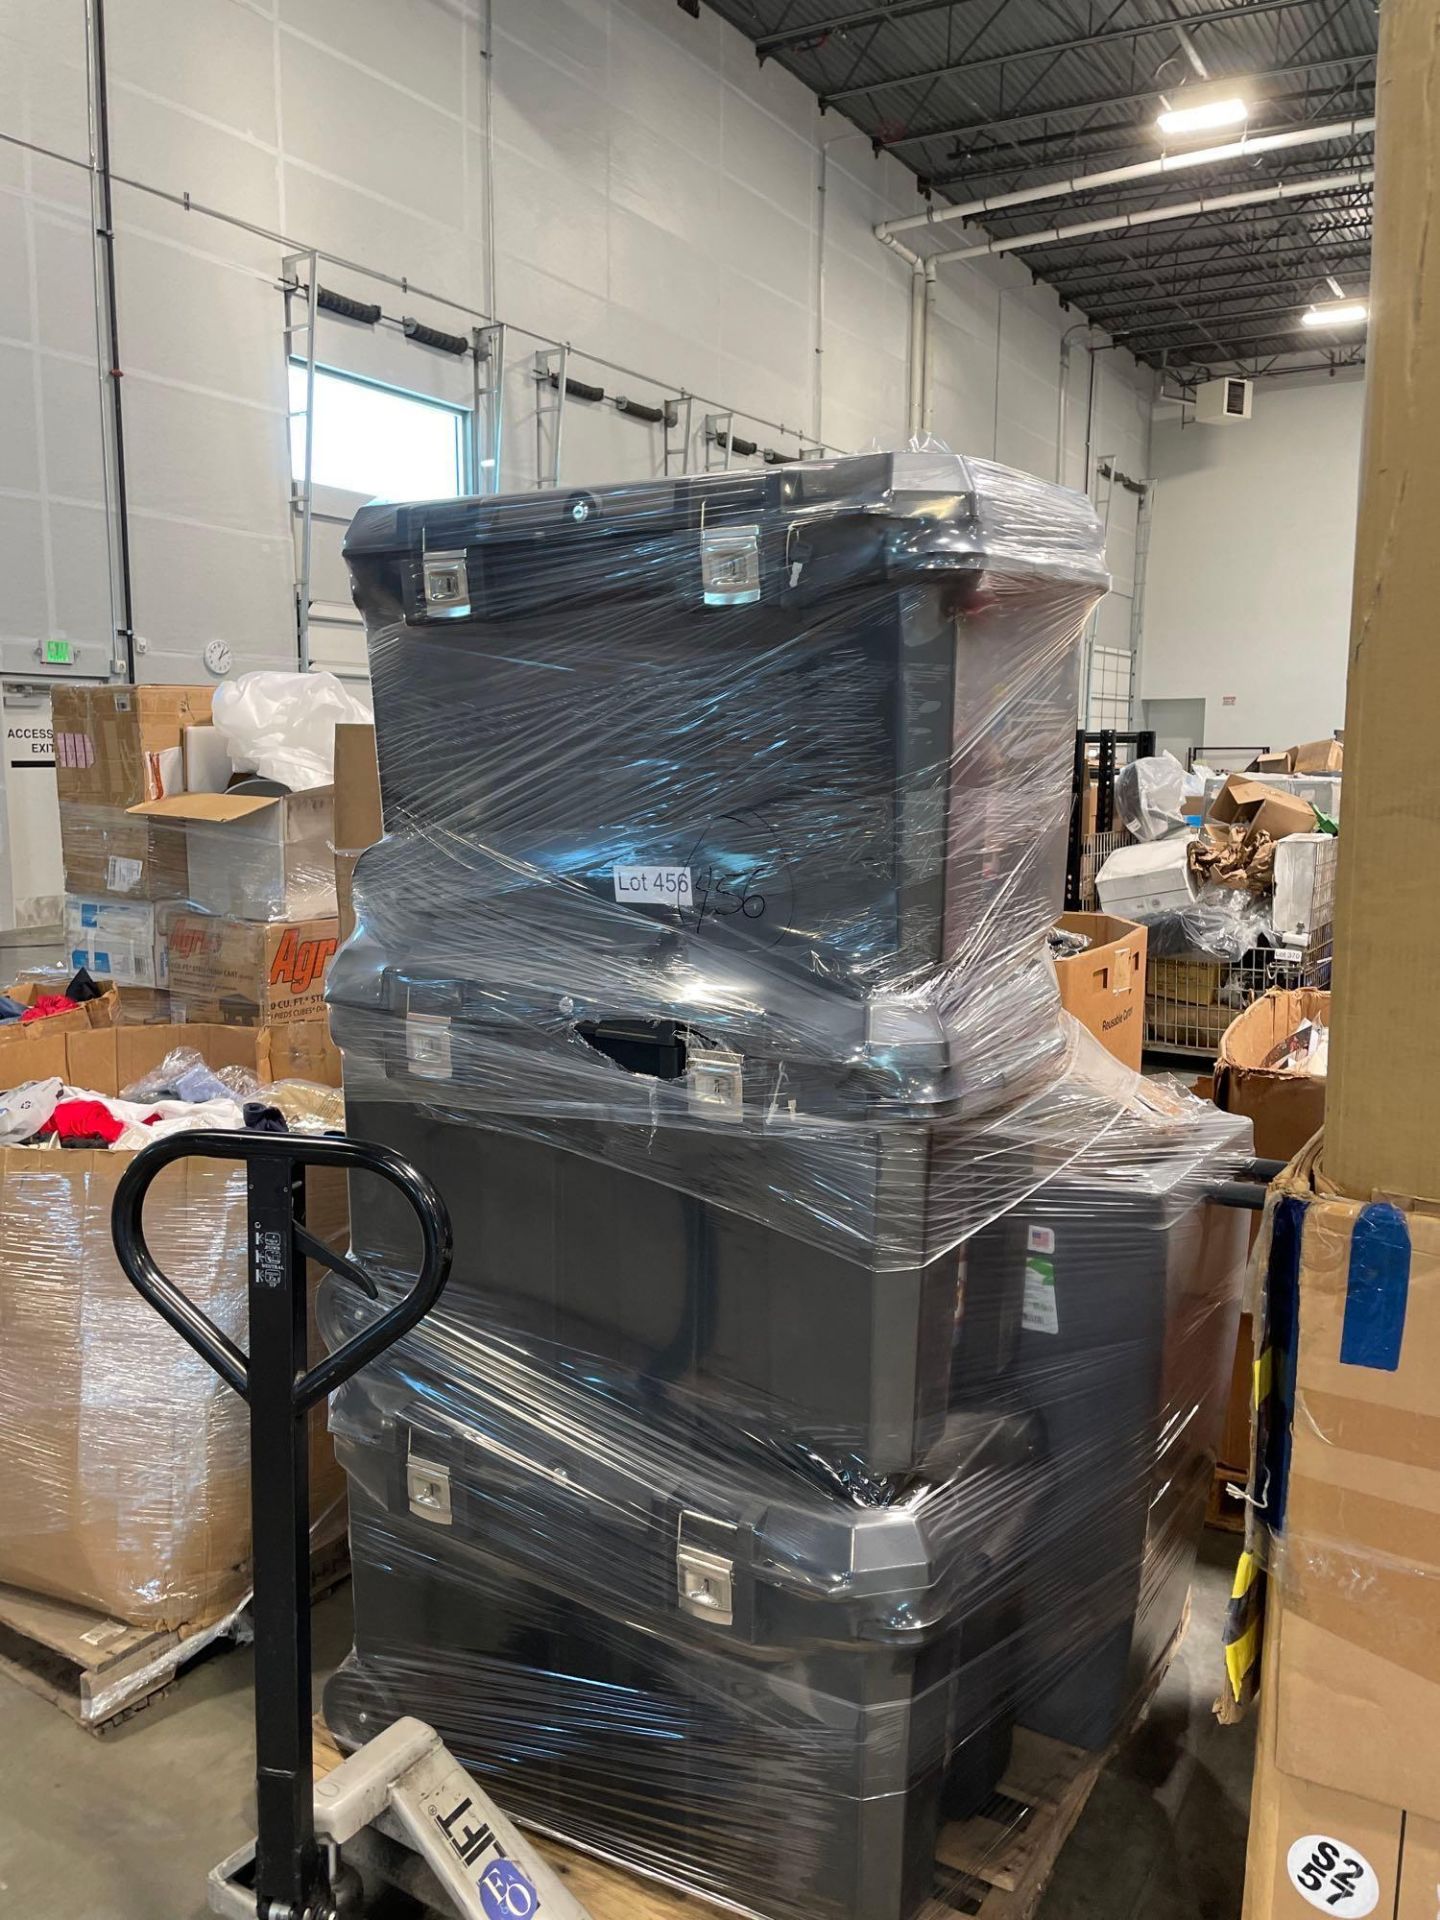 Pallet of Stanley Pro storage and more